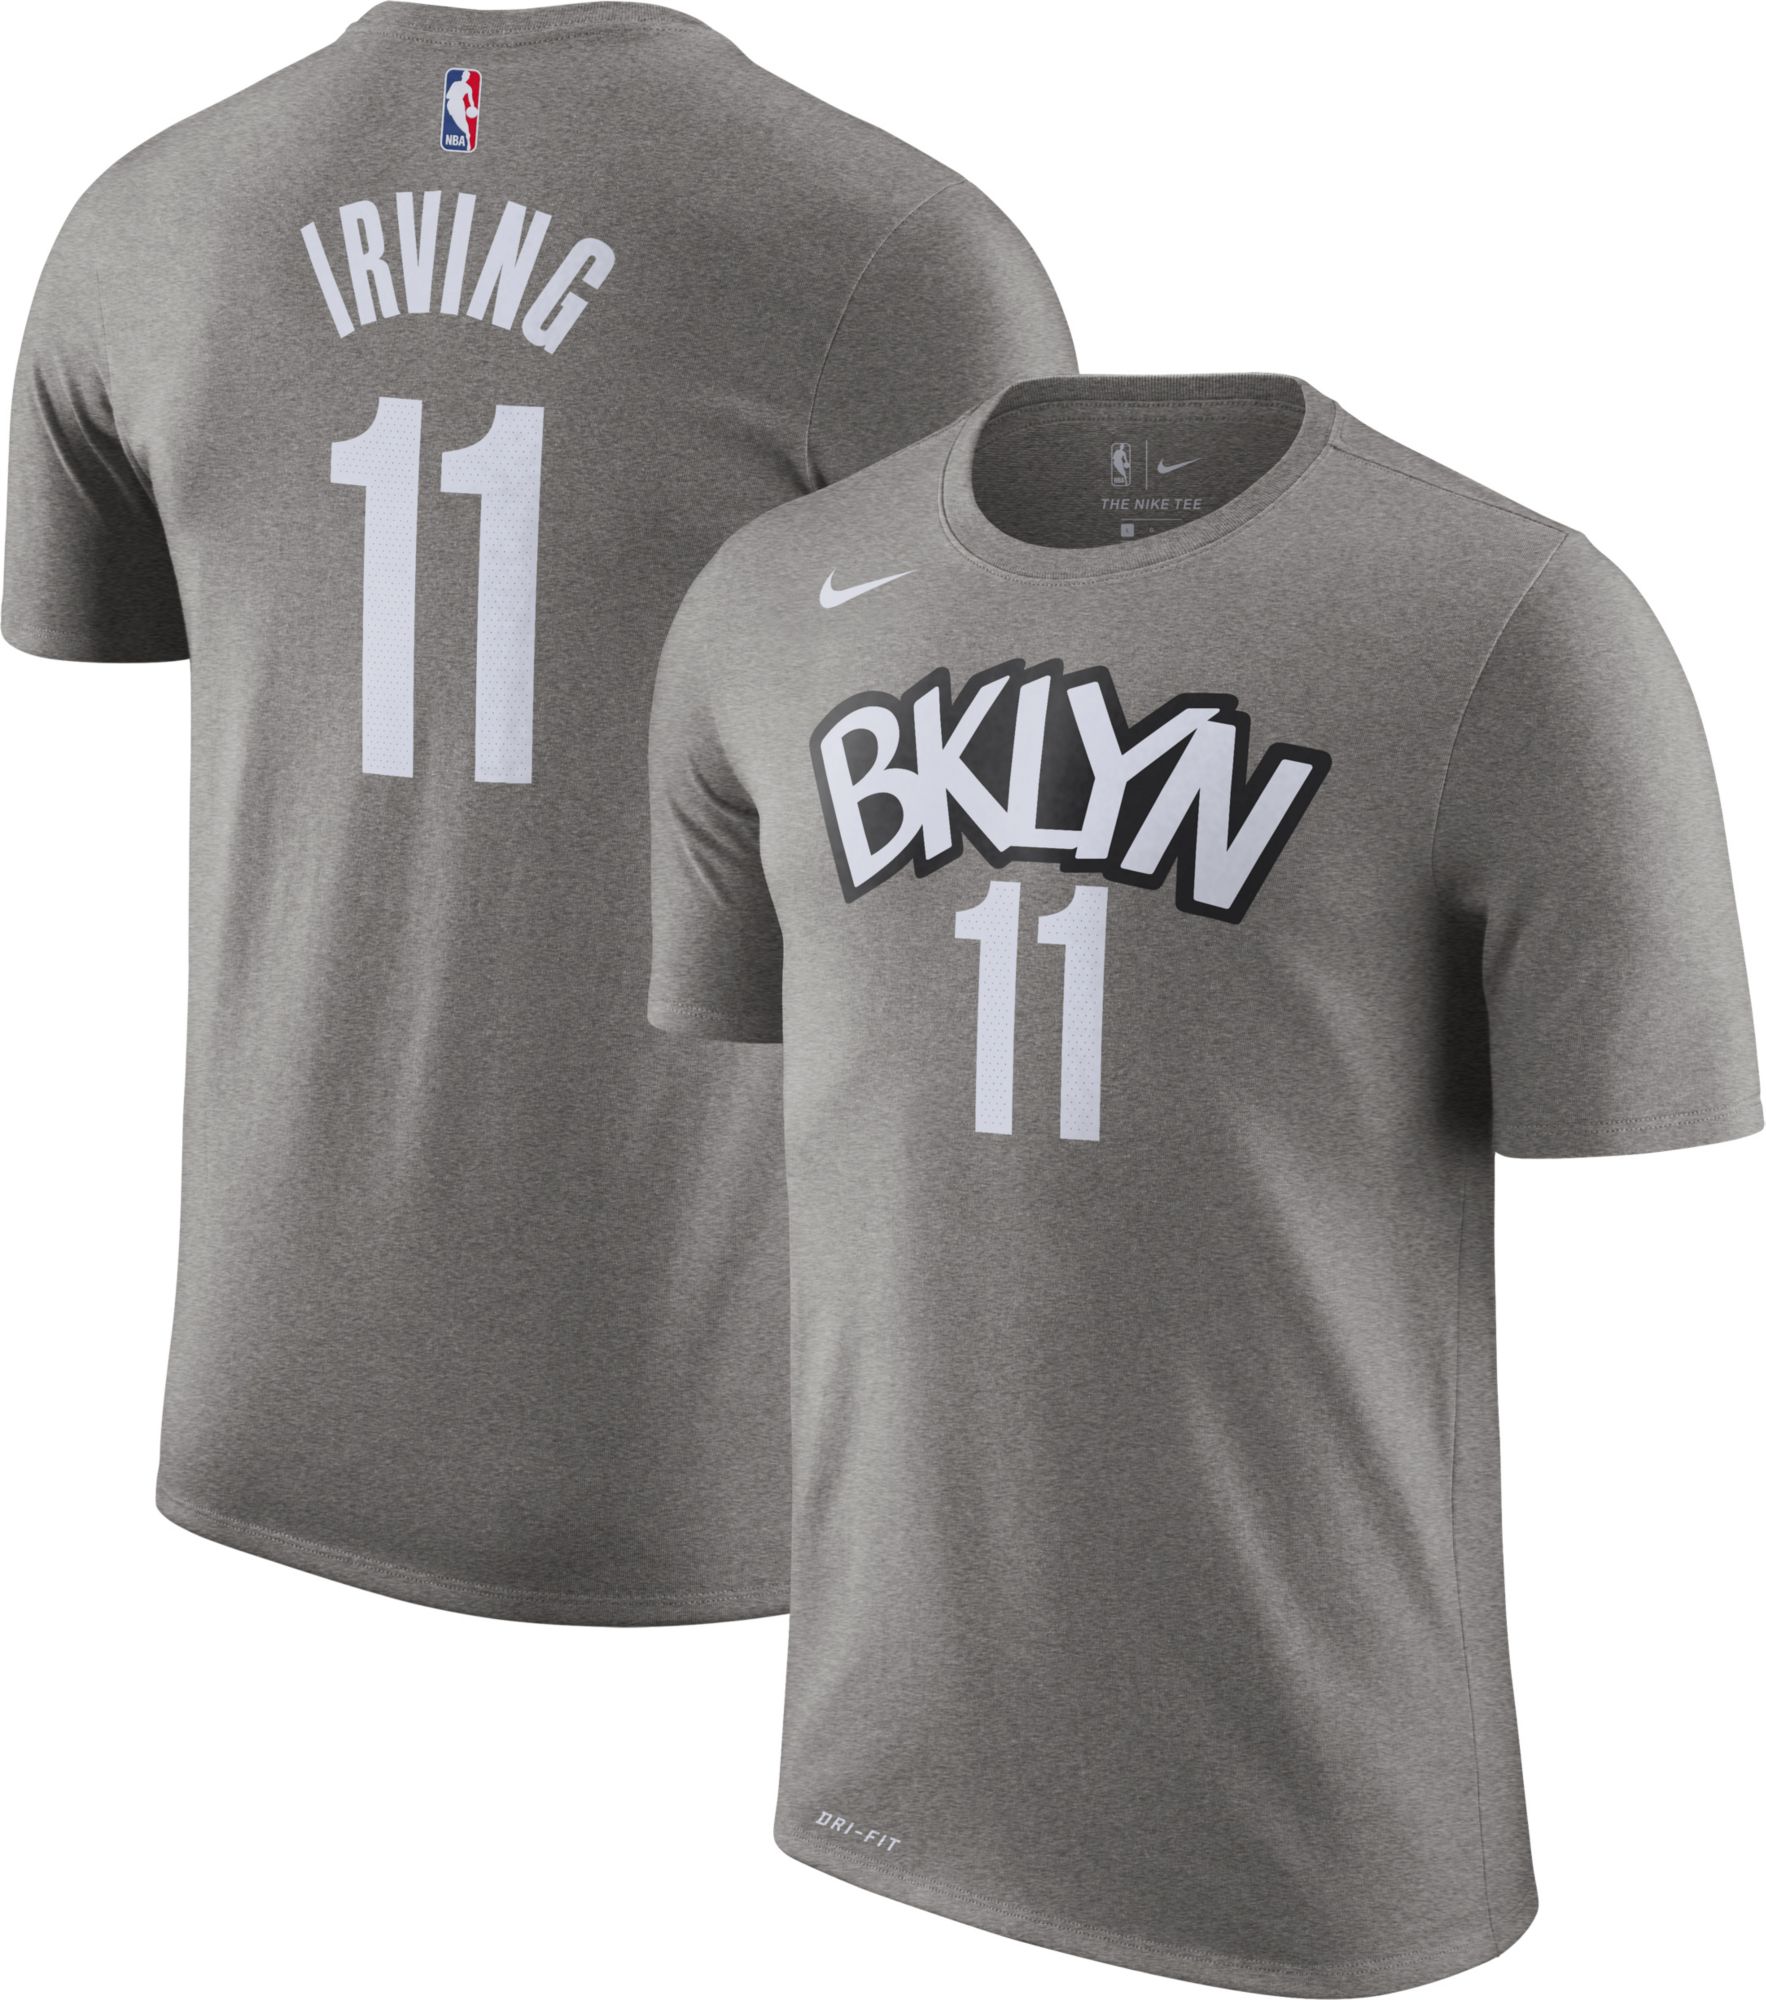 Kyrie Irving Cleveland Cavaliers adidas Net Number T-Shirt - White